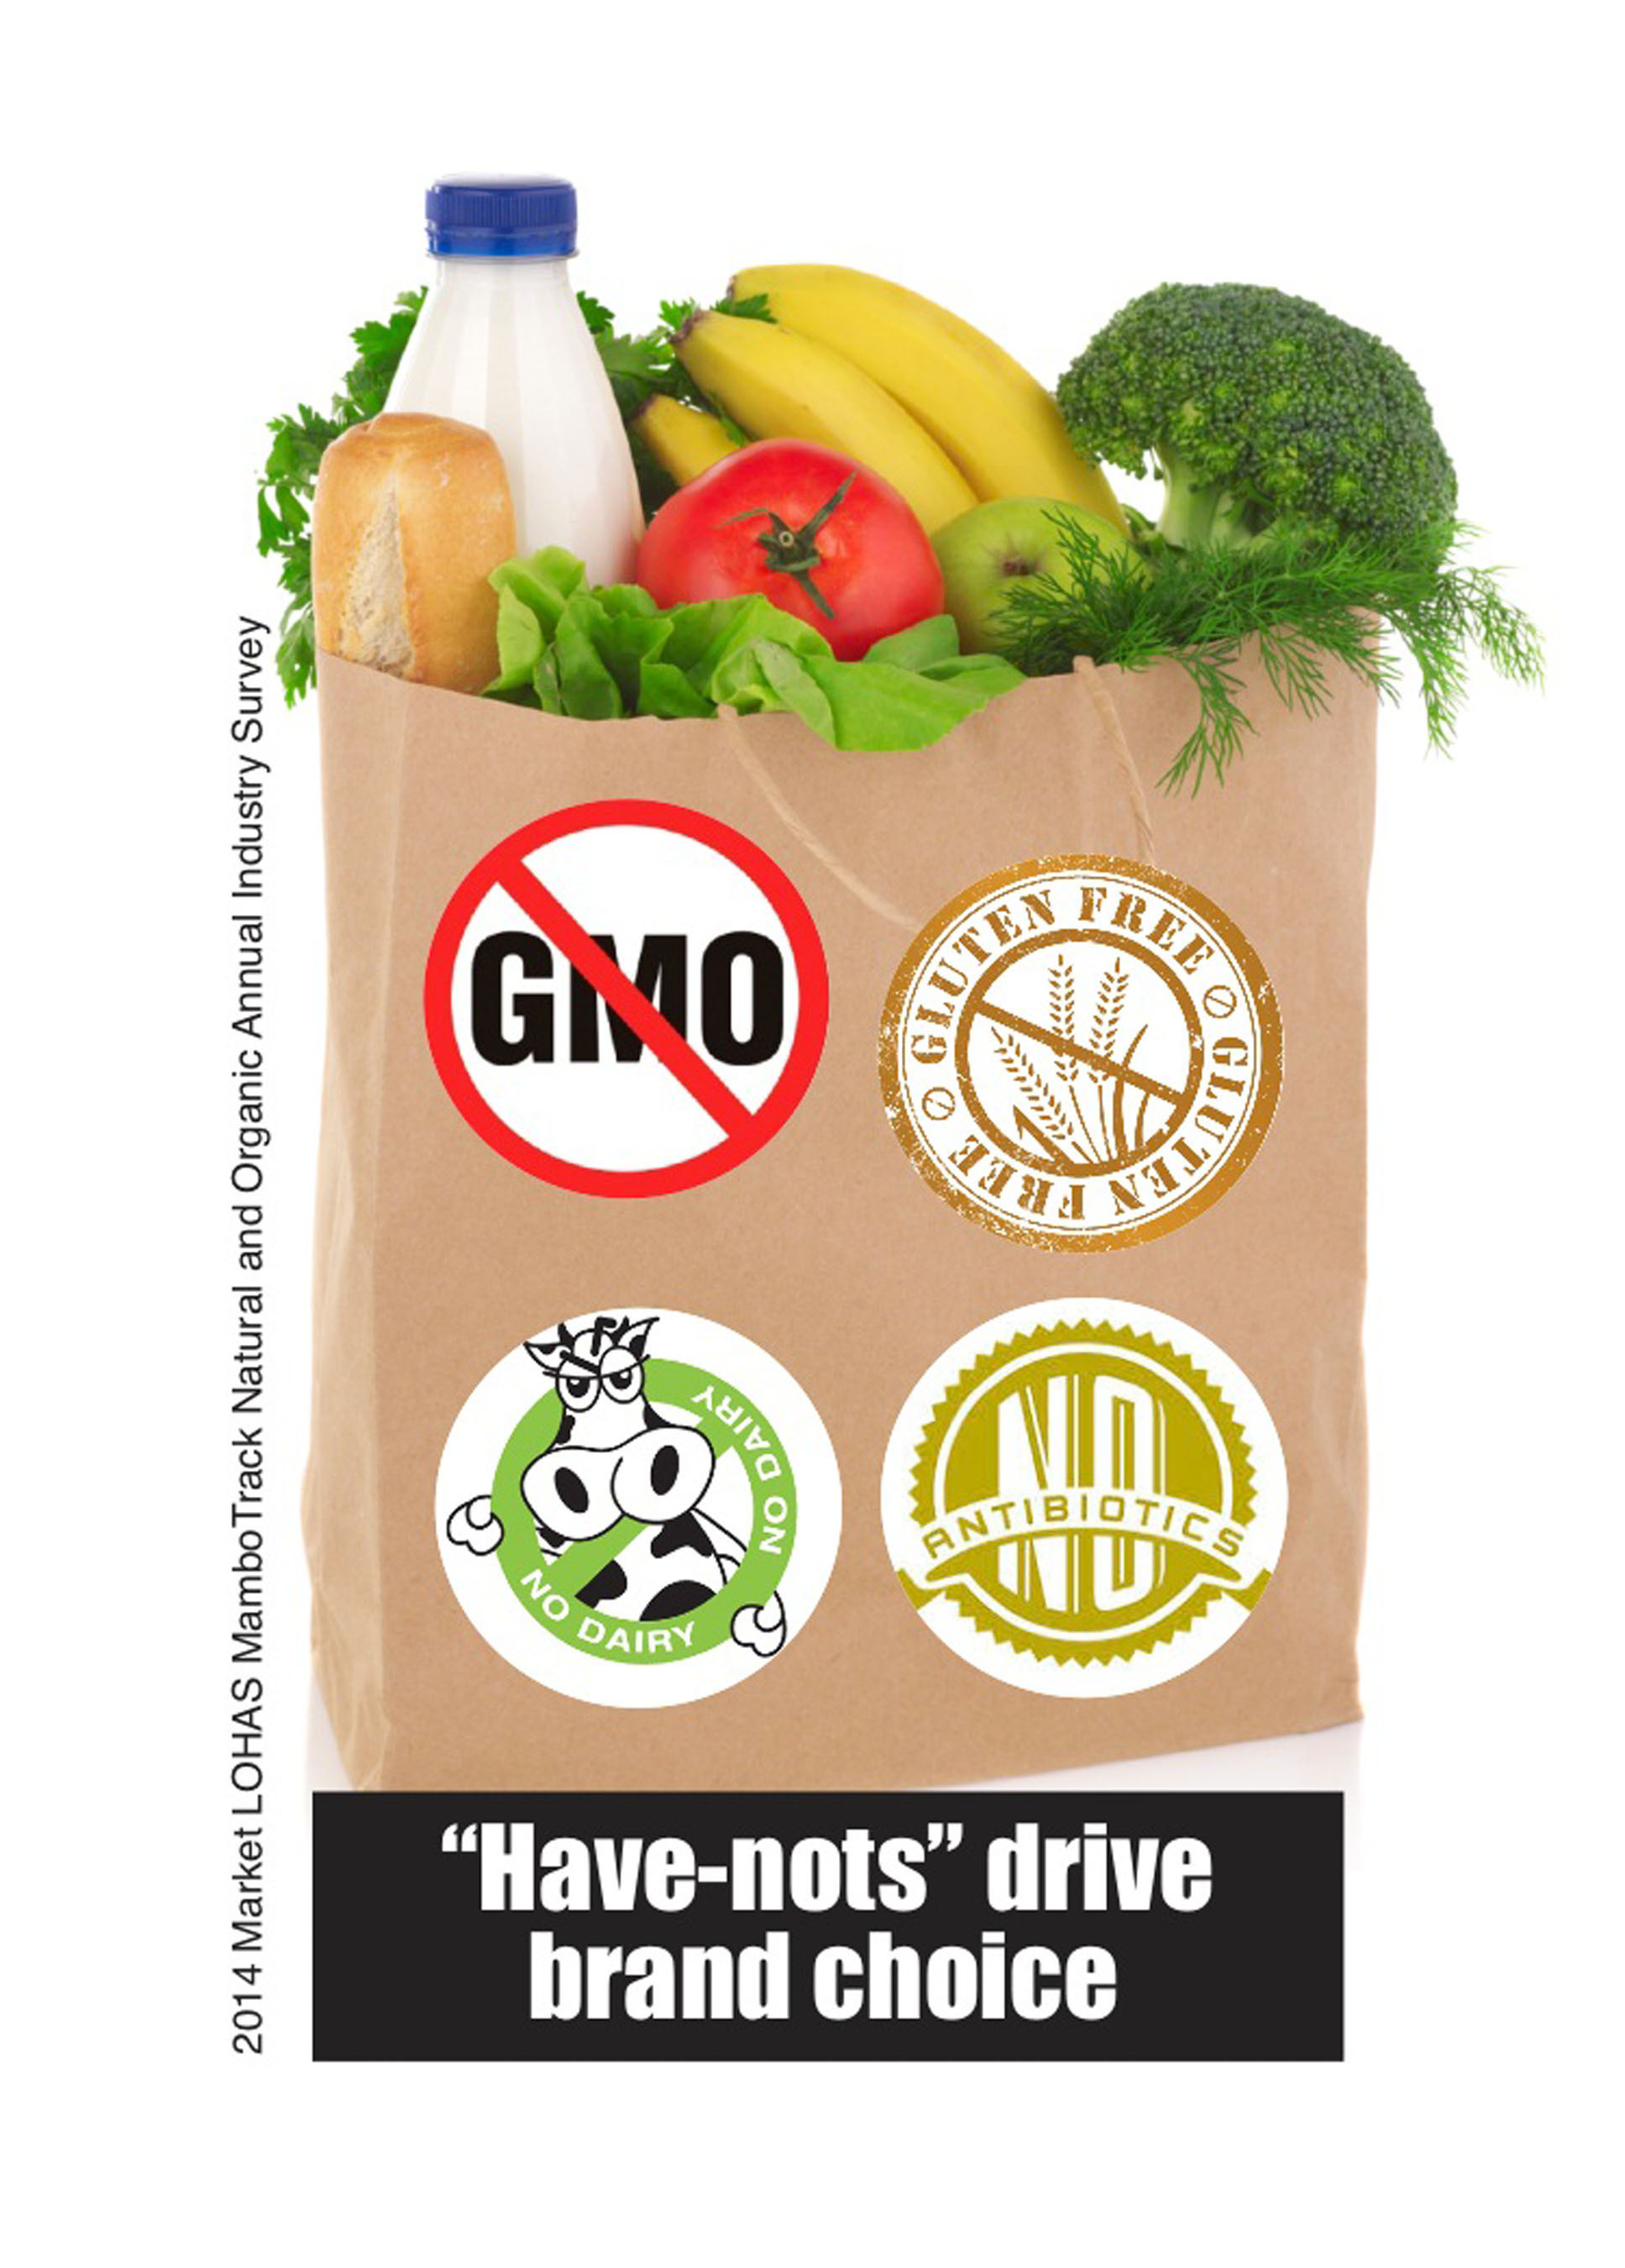 Have Nots Drive Healthy Brand Choice 2014 Market LOHAS MamboTrack Natural & Organic Consumer Research. Infographic by Vittles Food Marketing. (PRNewsFoto/Market LOHAS (Lifestyle Of Health And Sustainability)) (PRNewsFoto/MARKET LOHAS (LIFESTYLE OF ...)